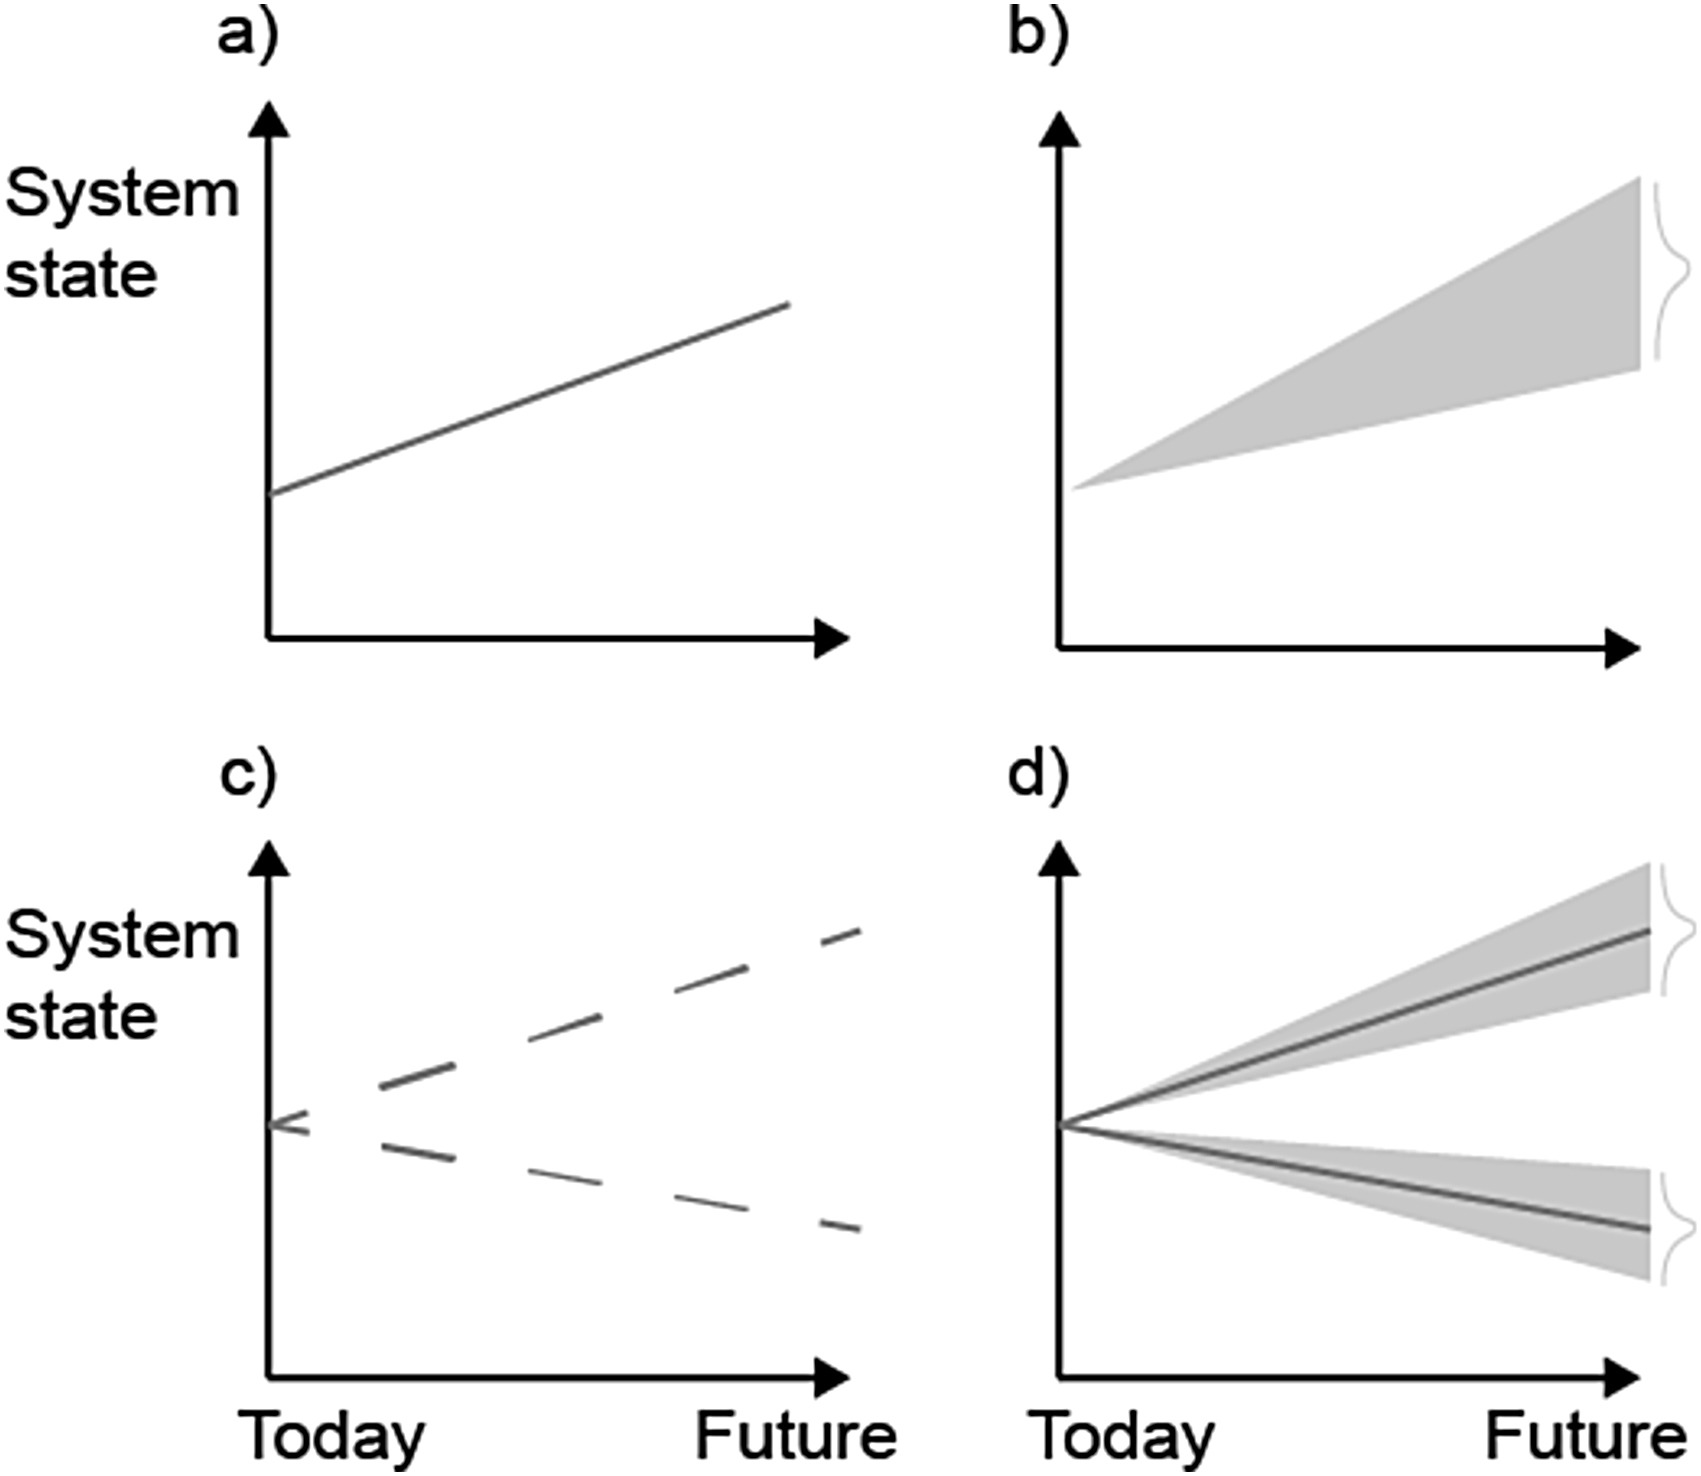 The difference between describing future system states through: a) anticipating the future based on best available knowledge, b) quantifying future uncertainty, c) exploring multiple plausible futures, d) combining the three paradigms to address different sources of uncertainty within a problem